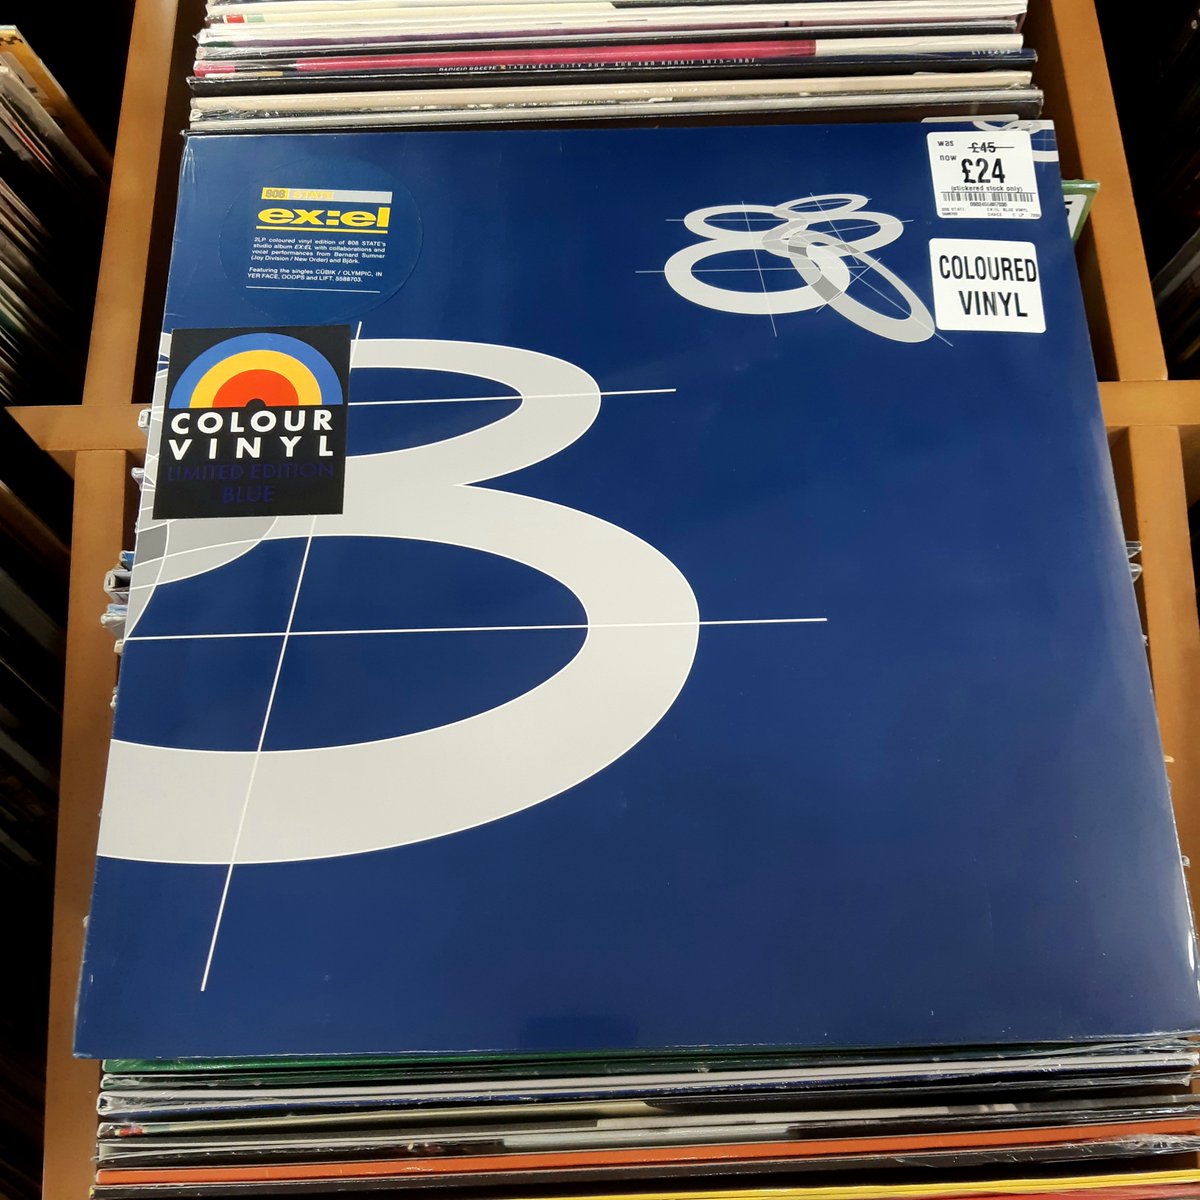 808 State's Ex:el is in stock on vinyl! Includes classic tracks like Cubik and In Yer Face. #gettofopp #808state